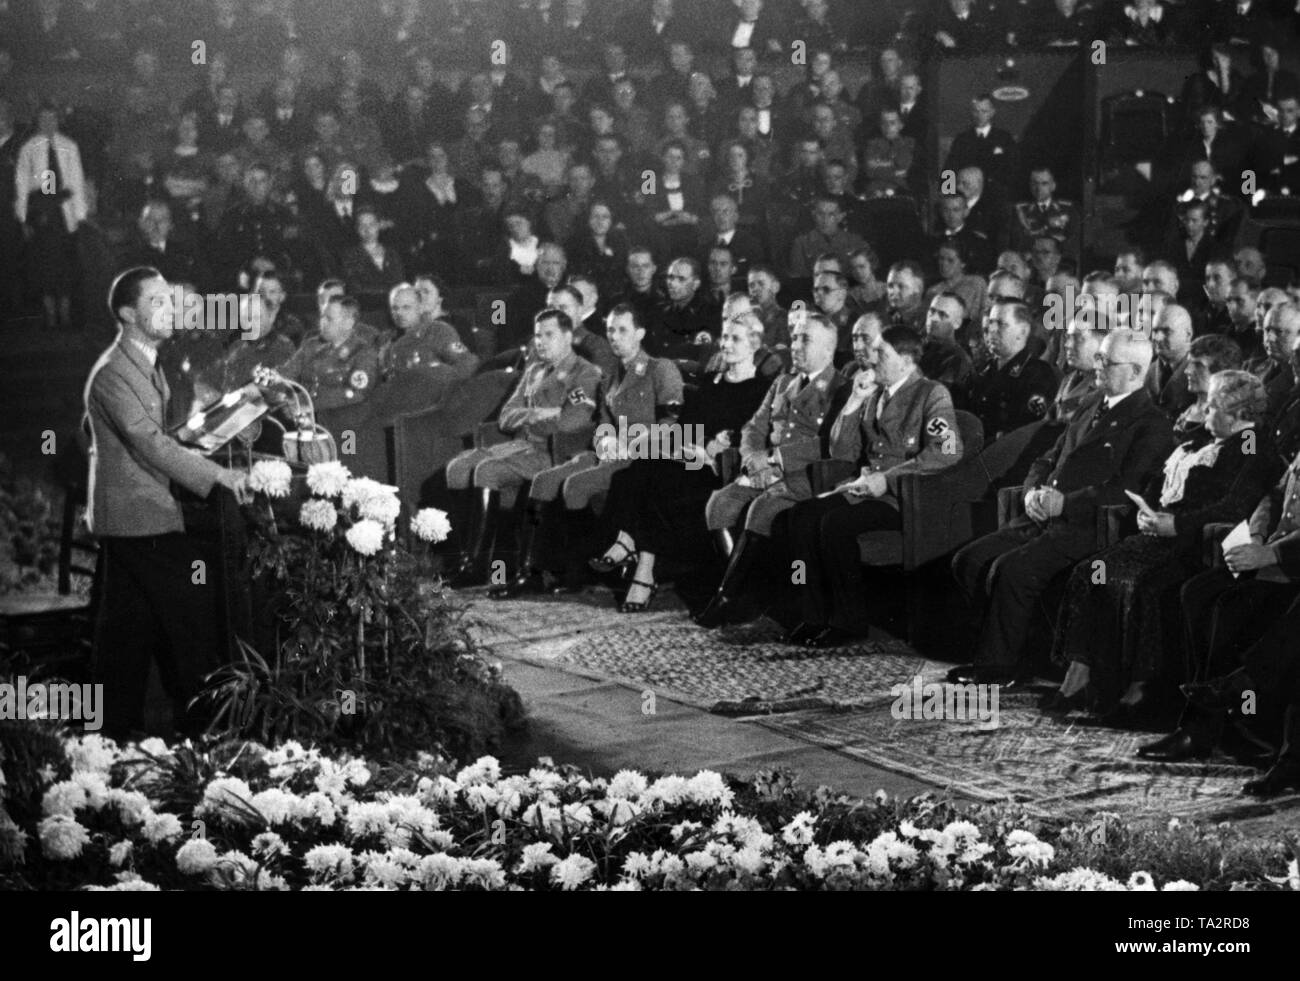 A festive evening takes place on the occasion of the second anniversary of the founding of the Nazi organization 'Kraft durch Freude' at the 'Theater des Volkes' (Theater of the People) in Berlin. Joseph Goebbels is holding a speech. Sitting from left: Baldur von Schirach, undersecretary Horst Dressler-Andress, Magda Goebbels, Robert Ley, Adolf Hitler (behind him, chief advisor Julius Schaub), Franz Xaver Schwarz and Berta Schwarz. Stock Photo